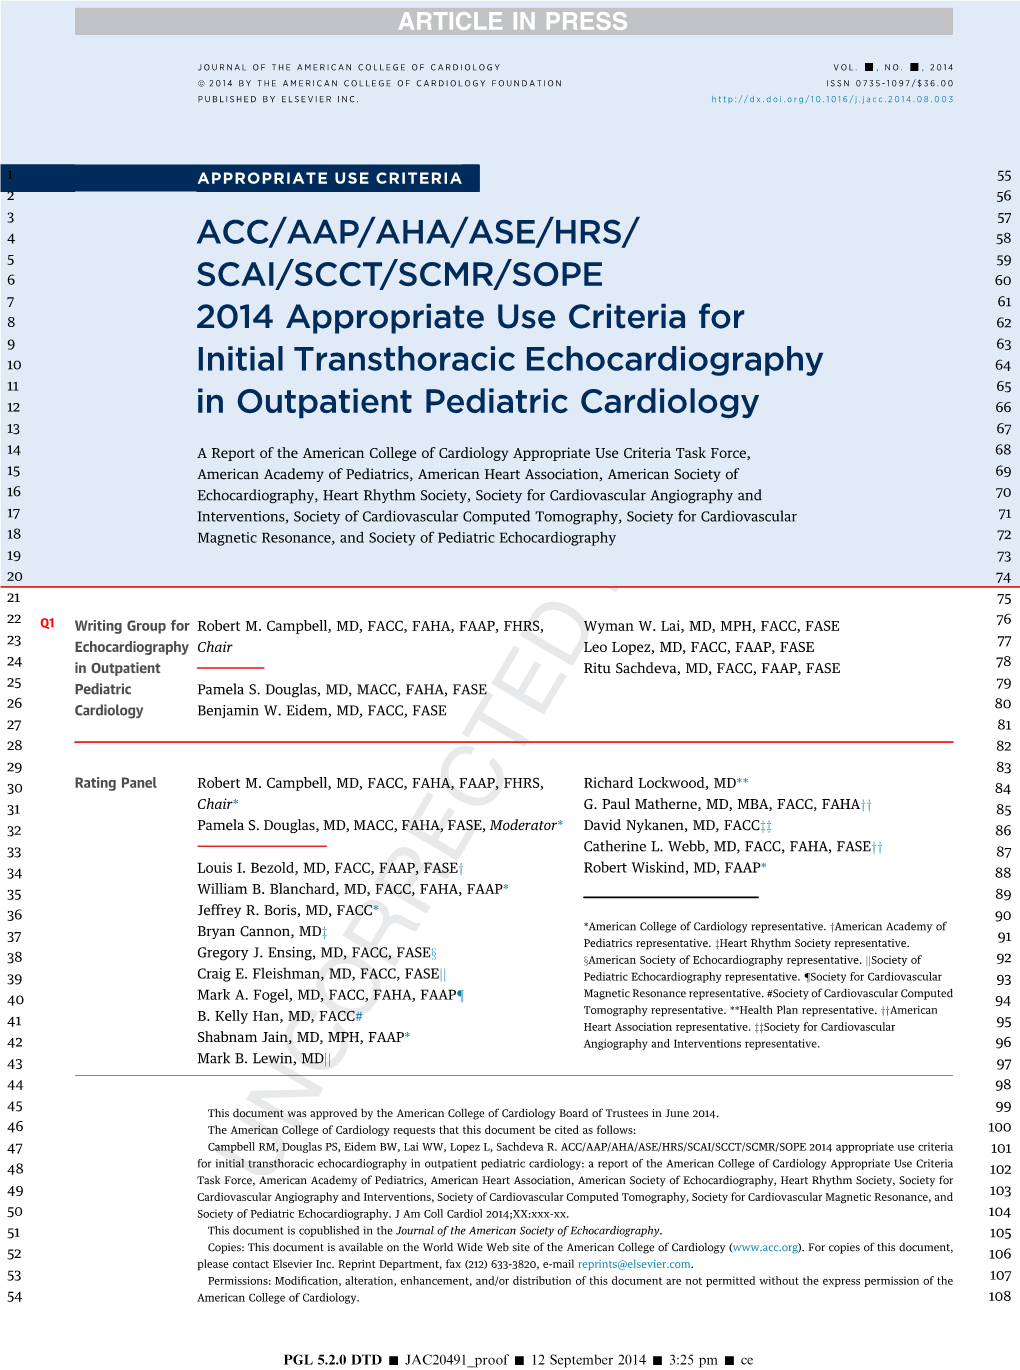 ACC/AAP/AHA/ASE/HRS/SCAI/SCCT/SCMR/SOPE 2014 Appropriate Use Criteria for Initial Transthoracic Echocardiography in Outpatient P